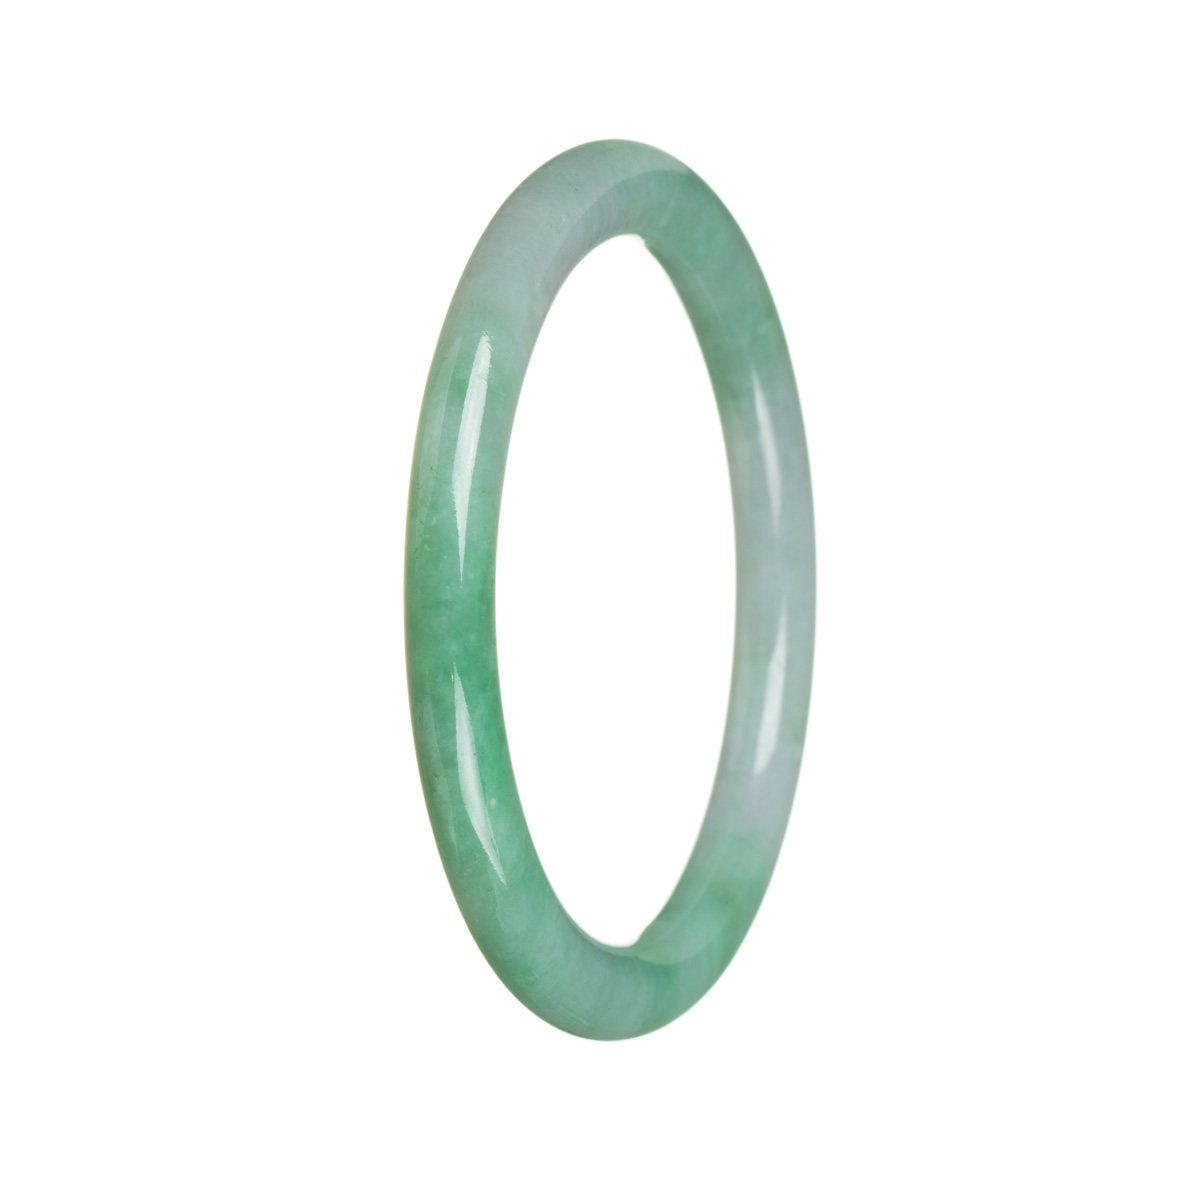 A close-up of a small, round apple green jadeite bangle with a smooth surface and a grade A quality. The bangle measures 57mm in diameter and is perfect for petite wrists.